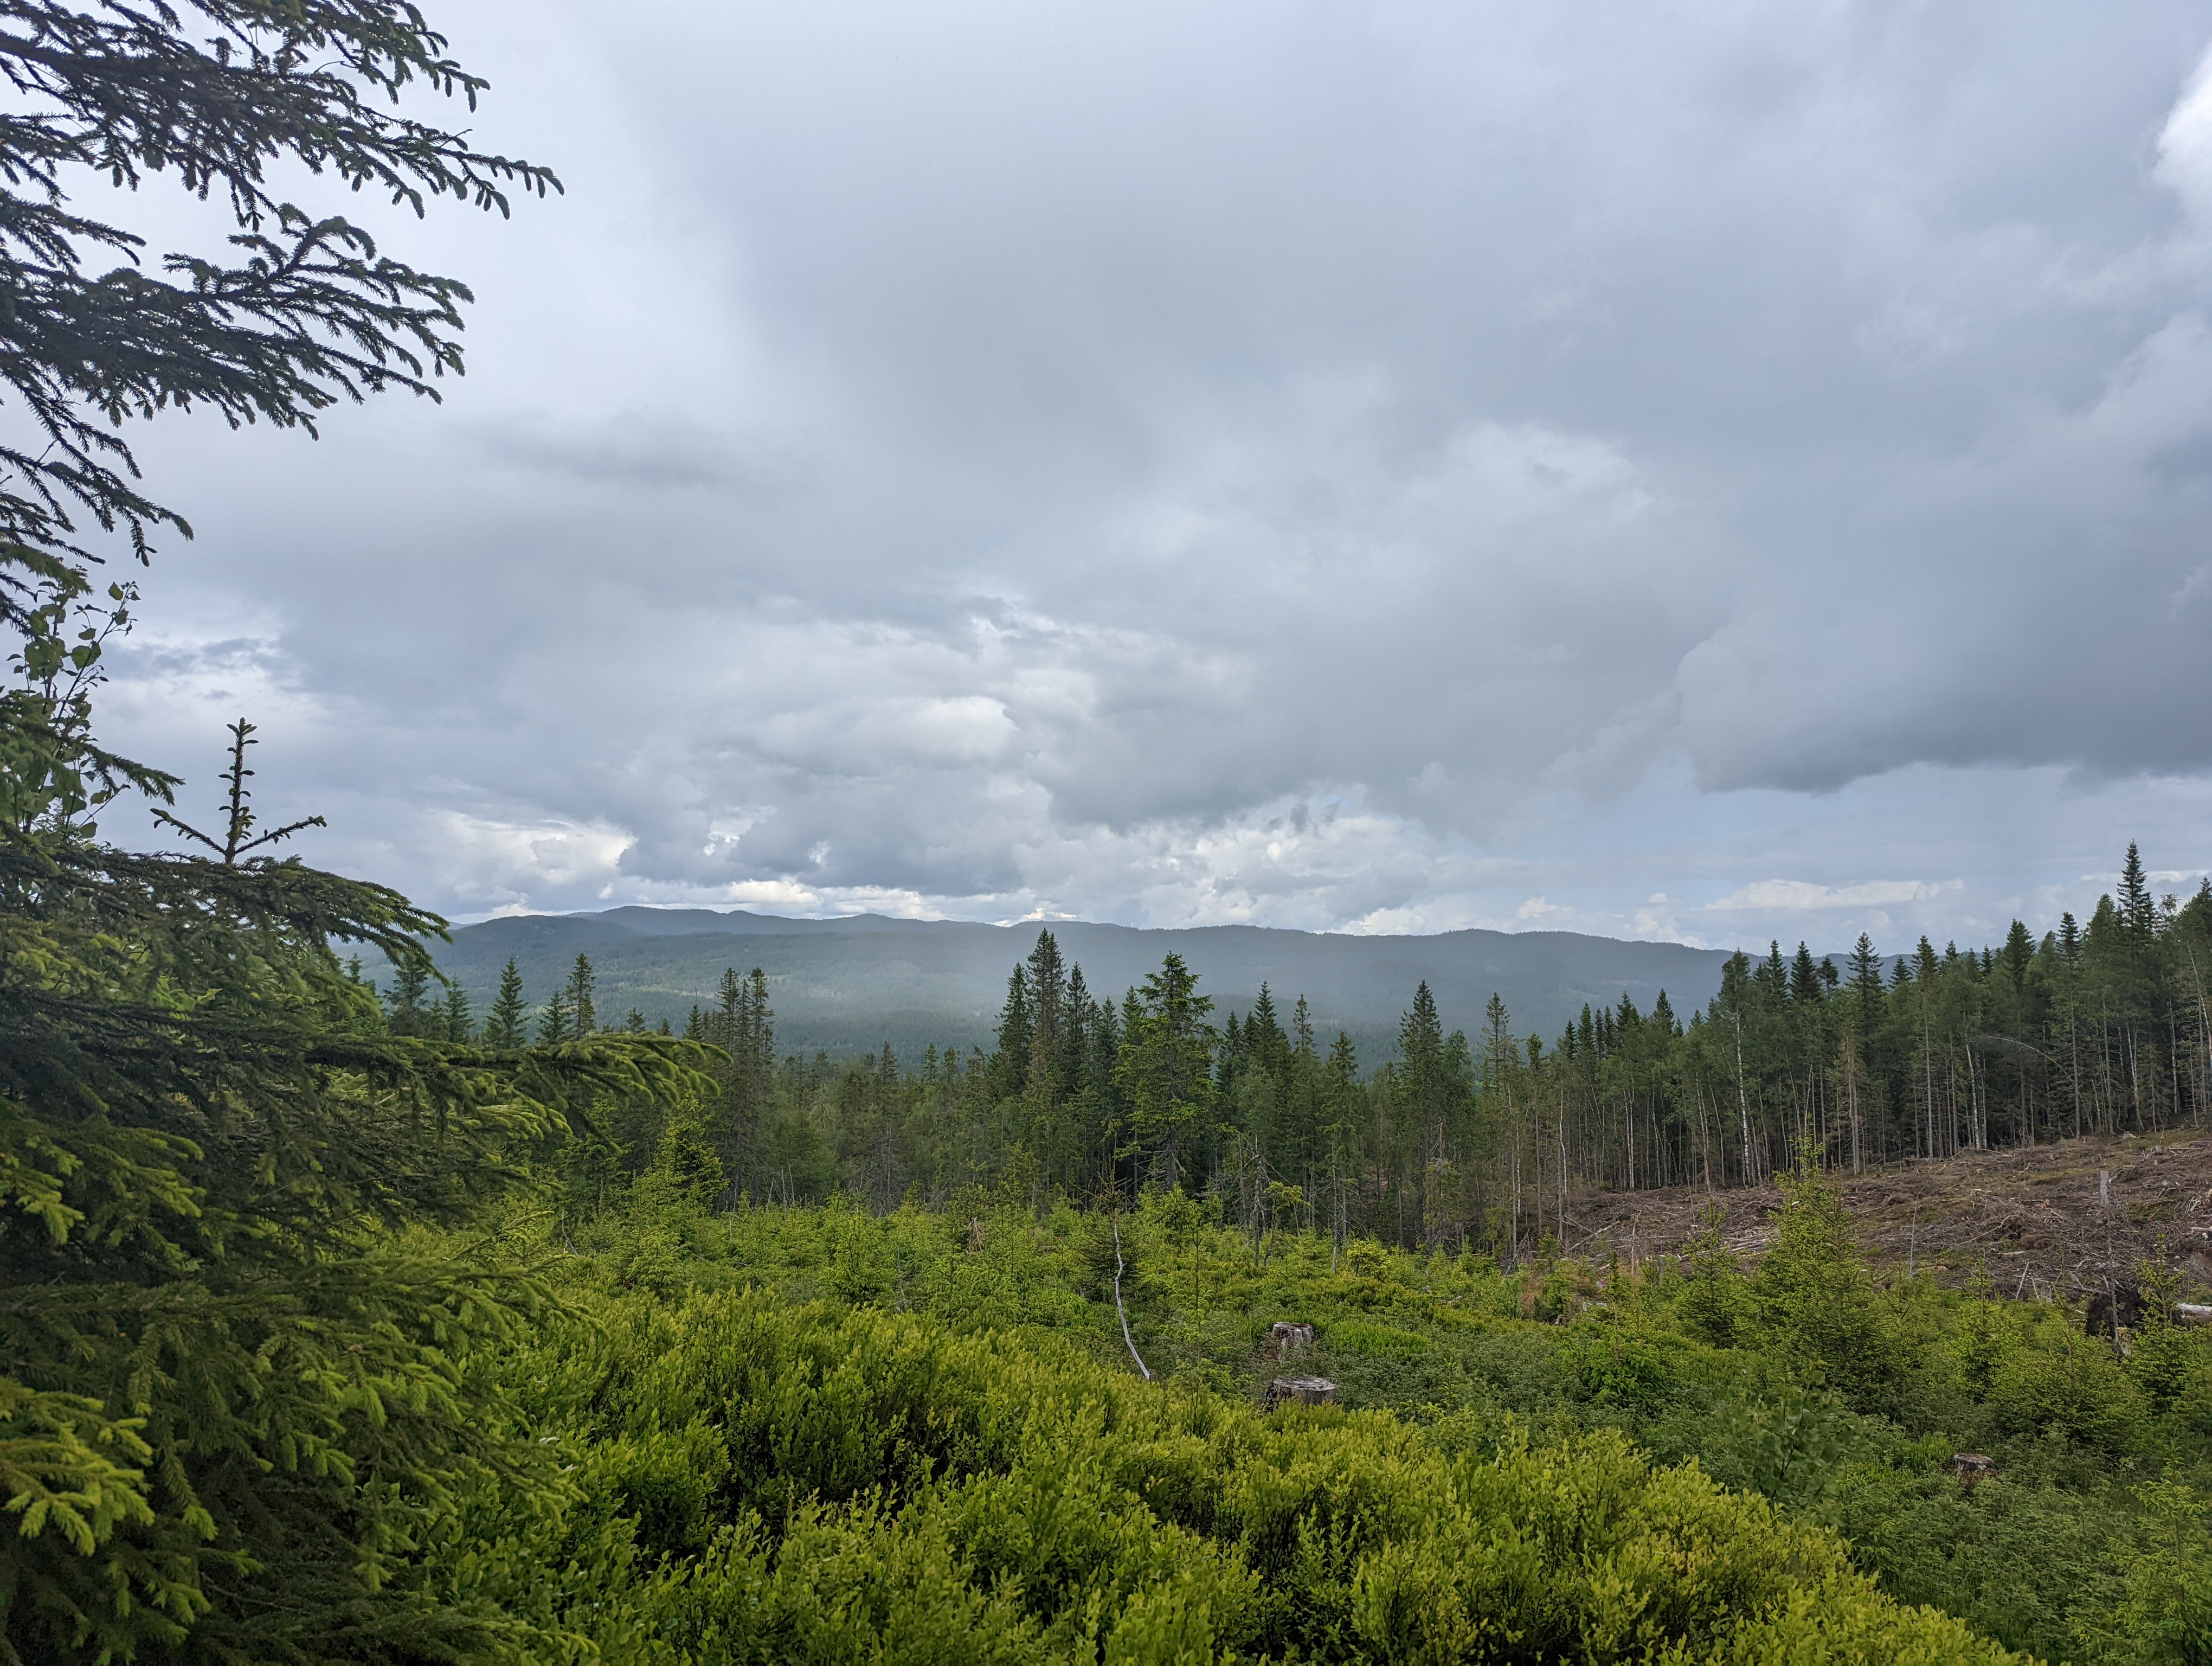 Photo of a green landscape, with many trees, fog in the background, and slightly cloudy skies.